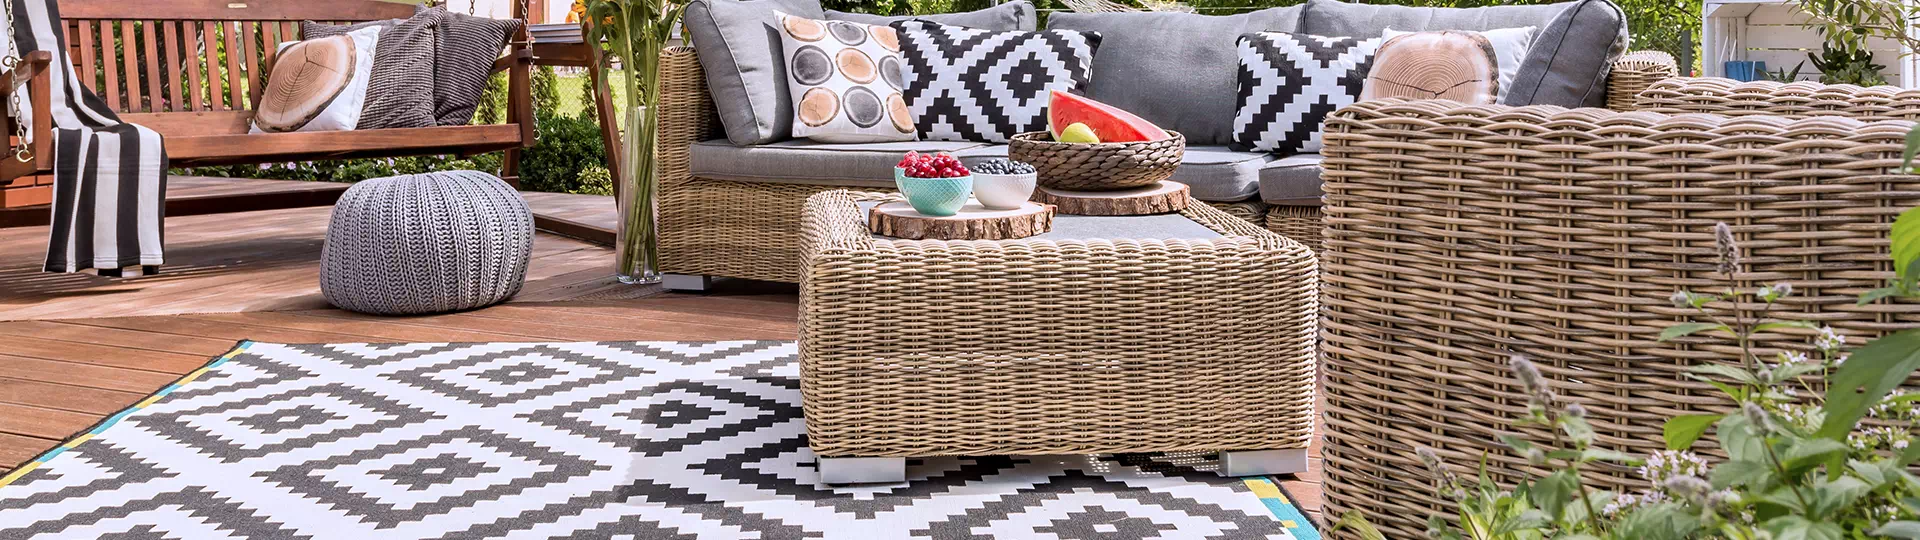 How to Clean an Outdoor Rug - Simple Green